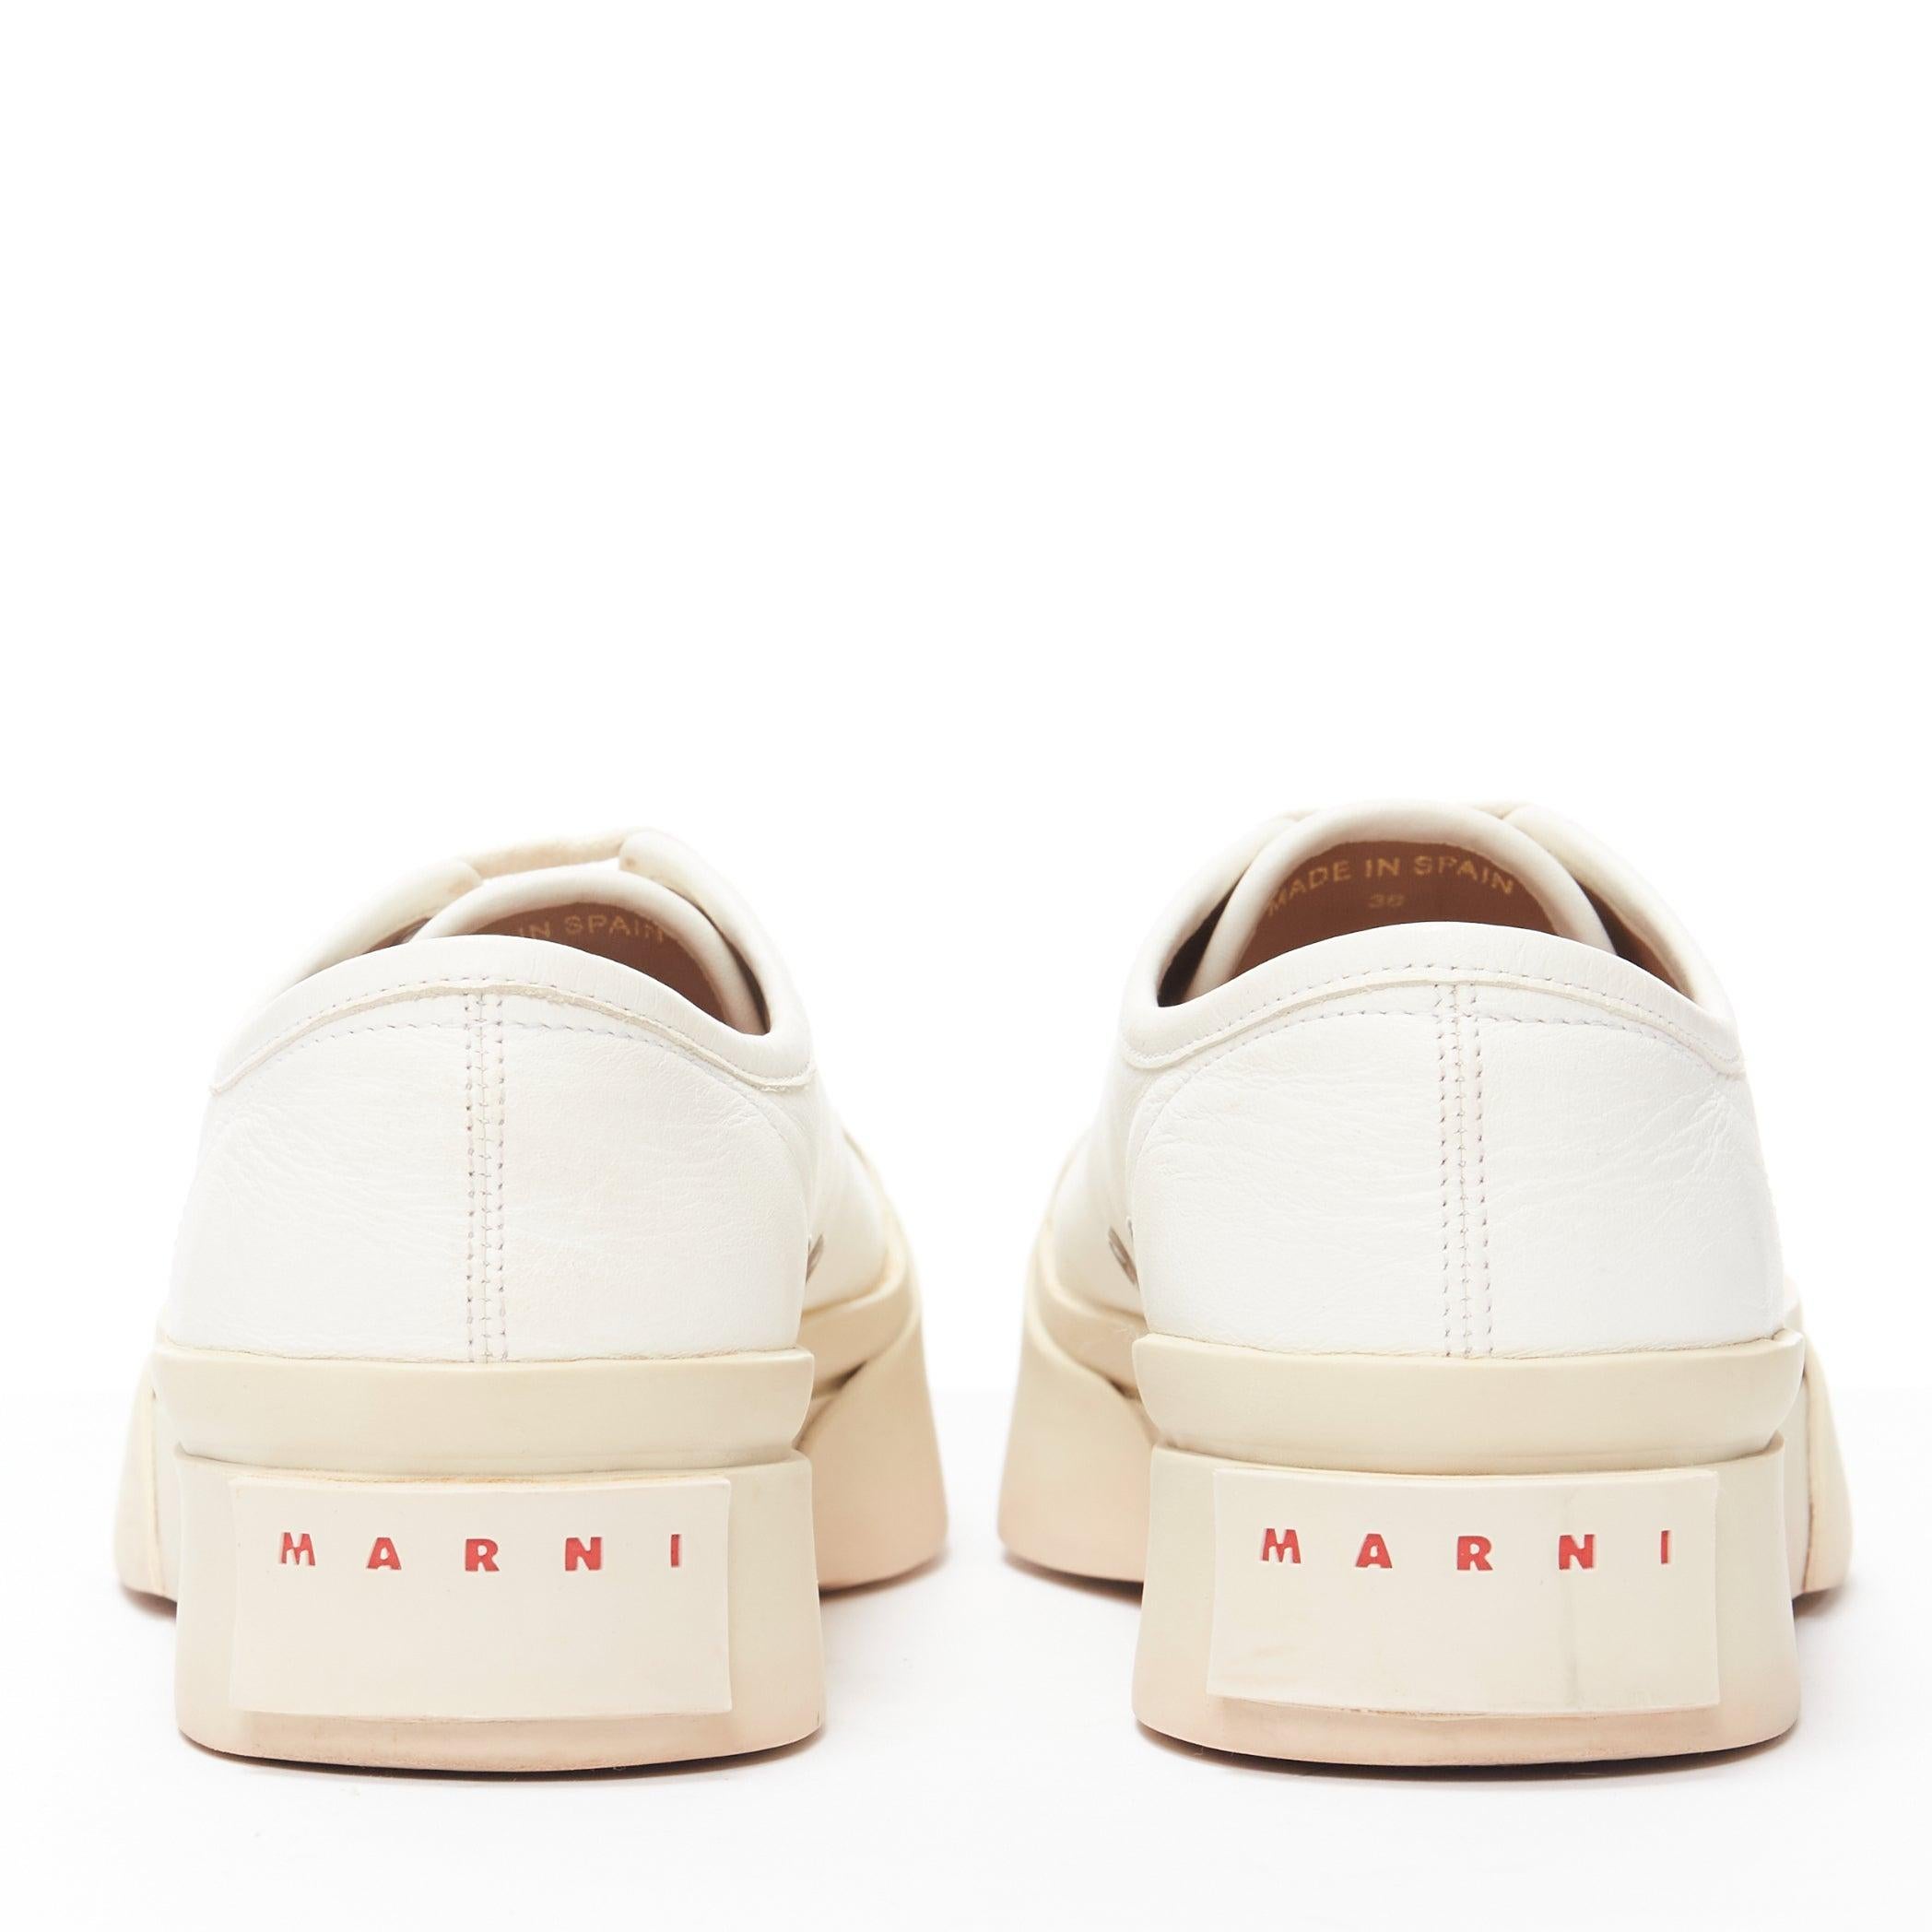 MARNI Pablo white leather chunky wide toe lace up low top sneakers EU36 For Sale 1